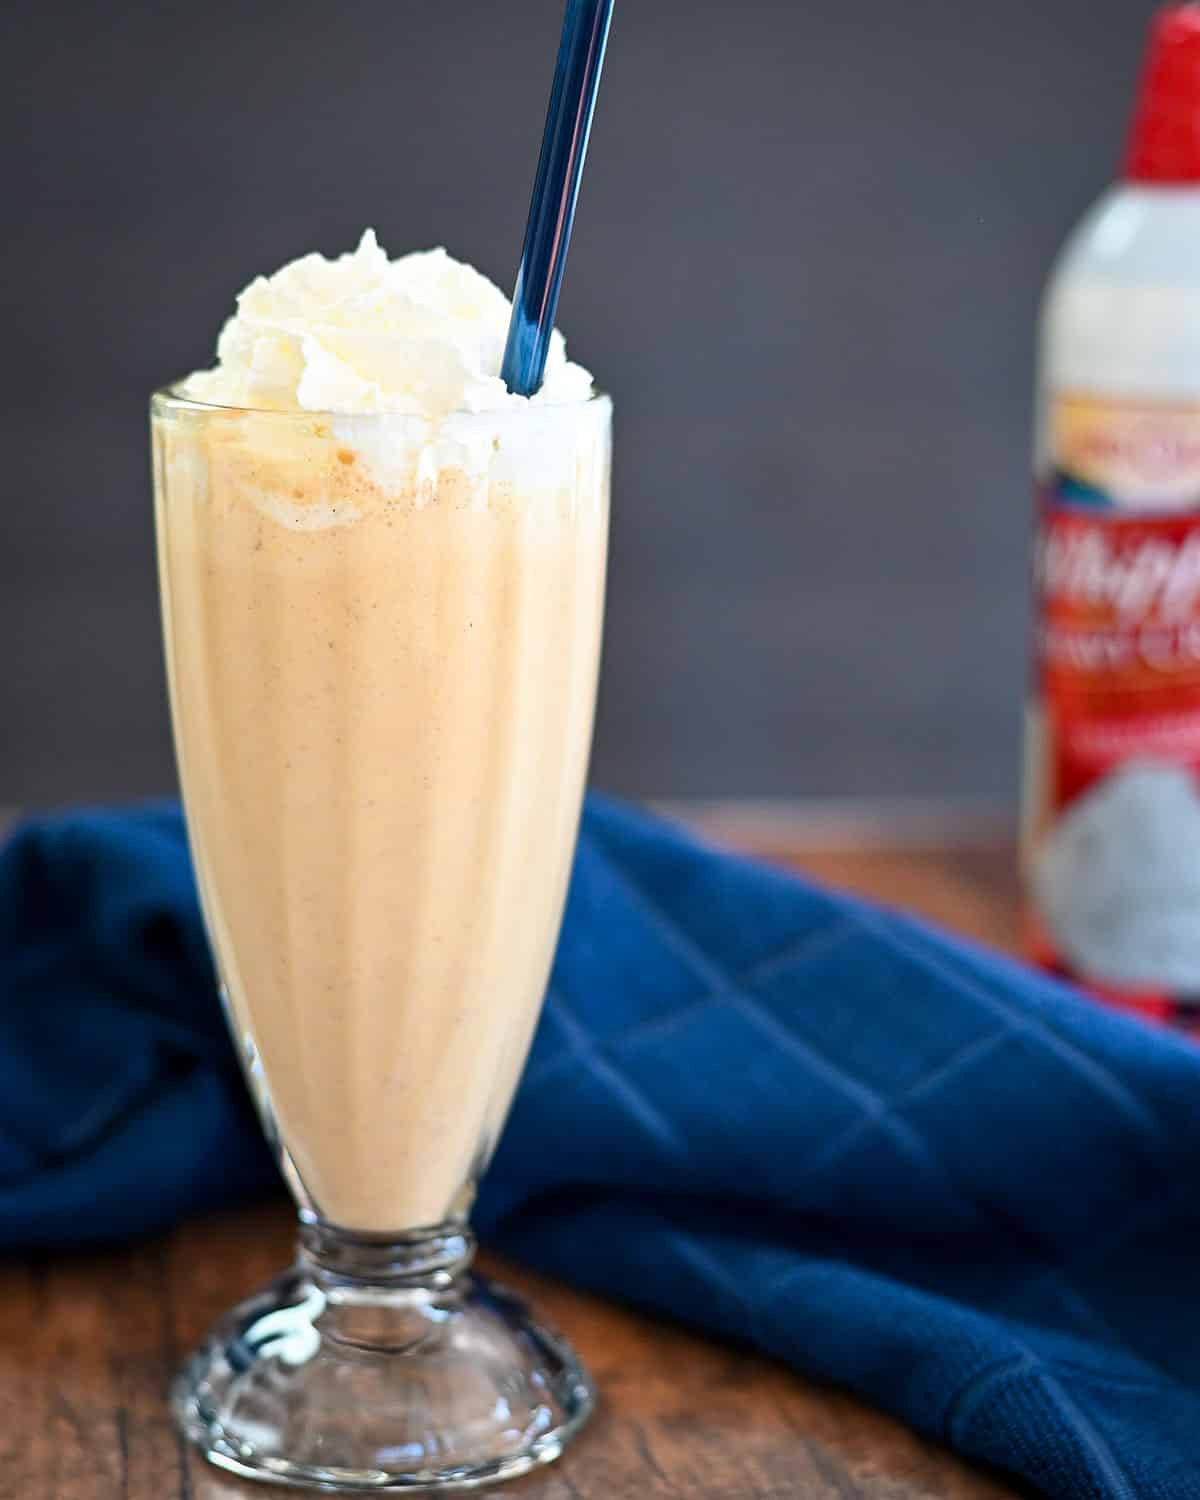 Milkshake in a glass with a blue straw next to a blue towel and a can of whipped topping.